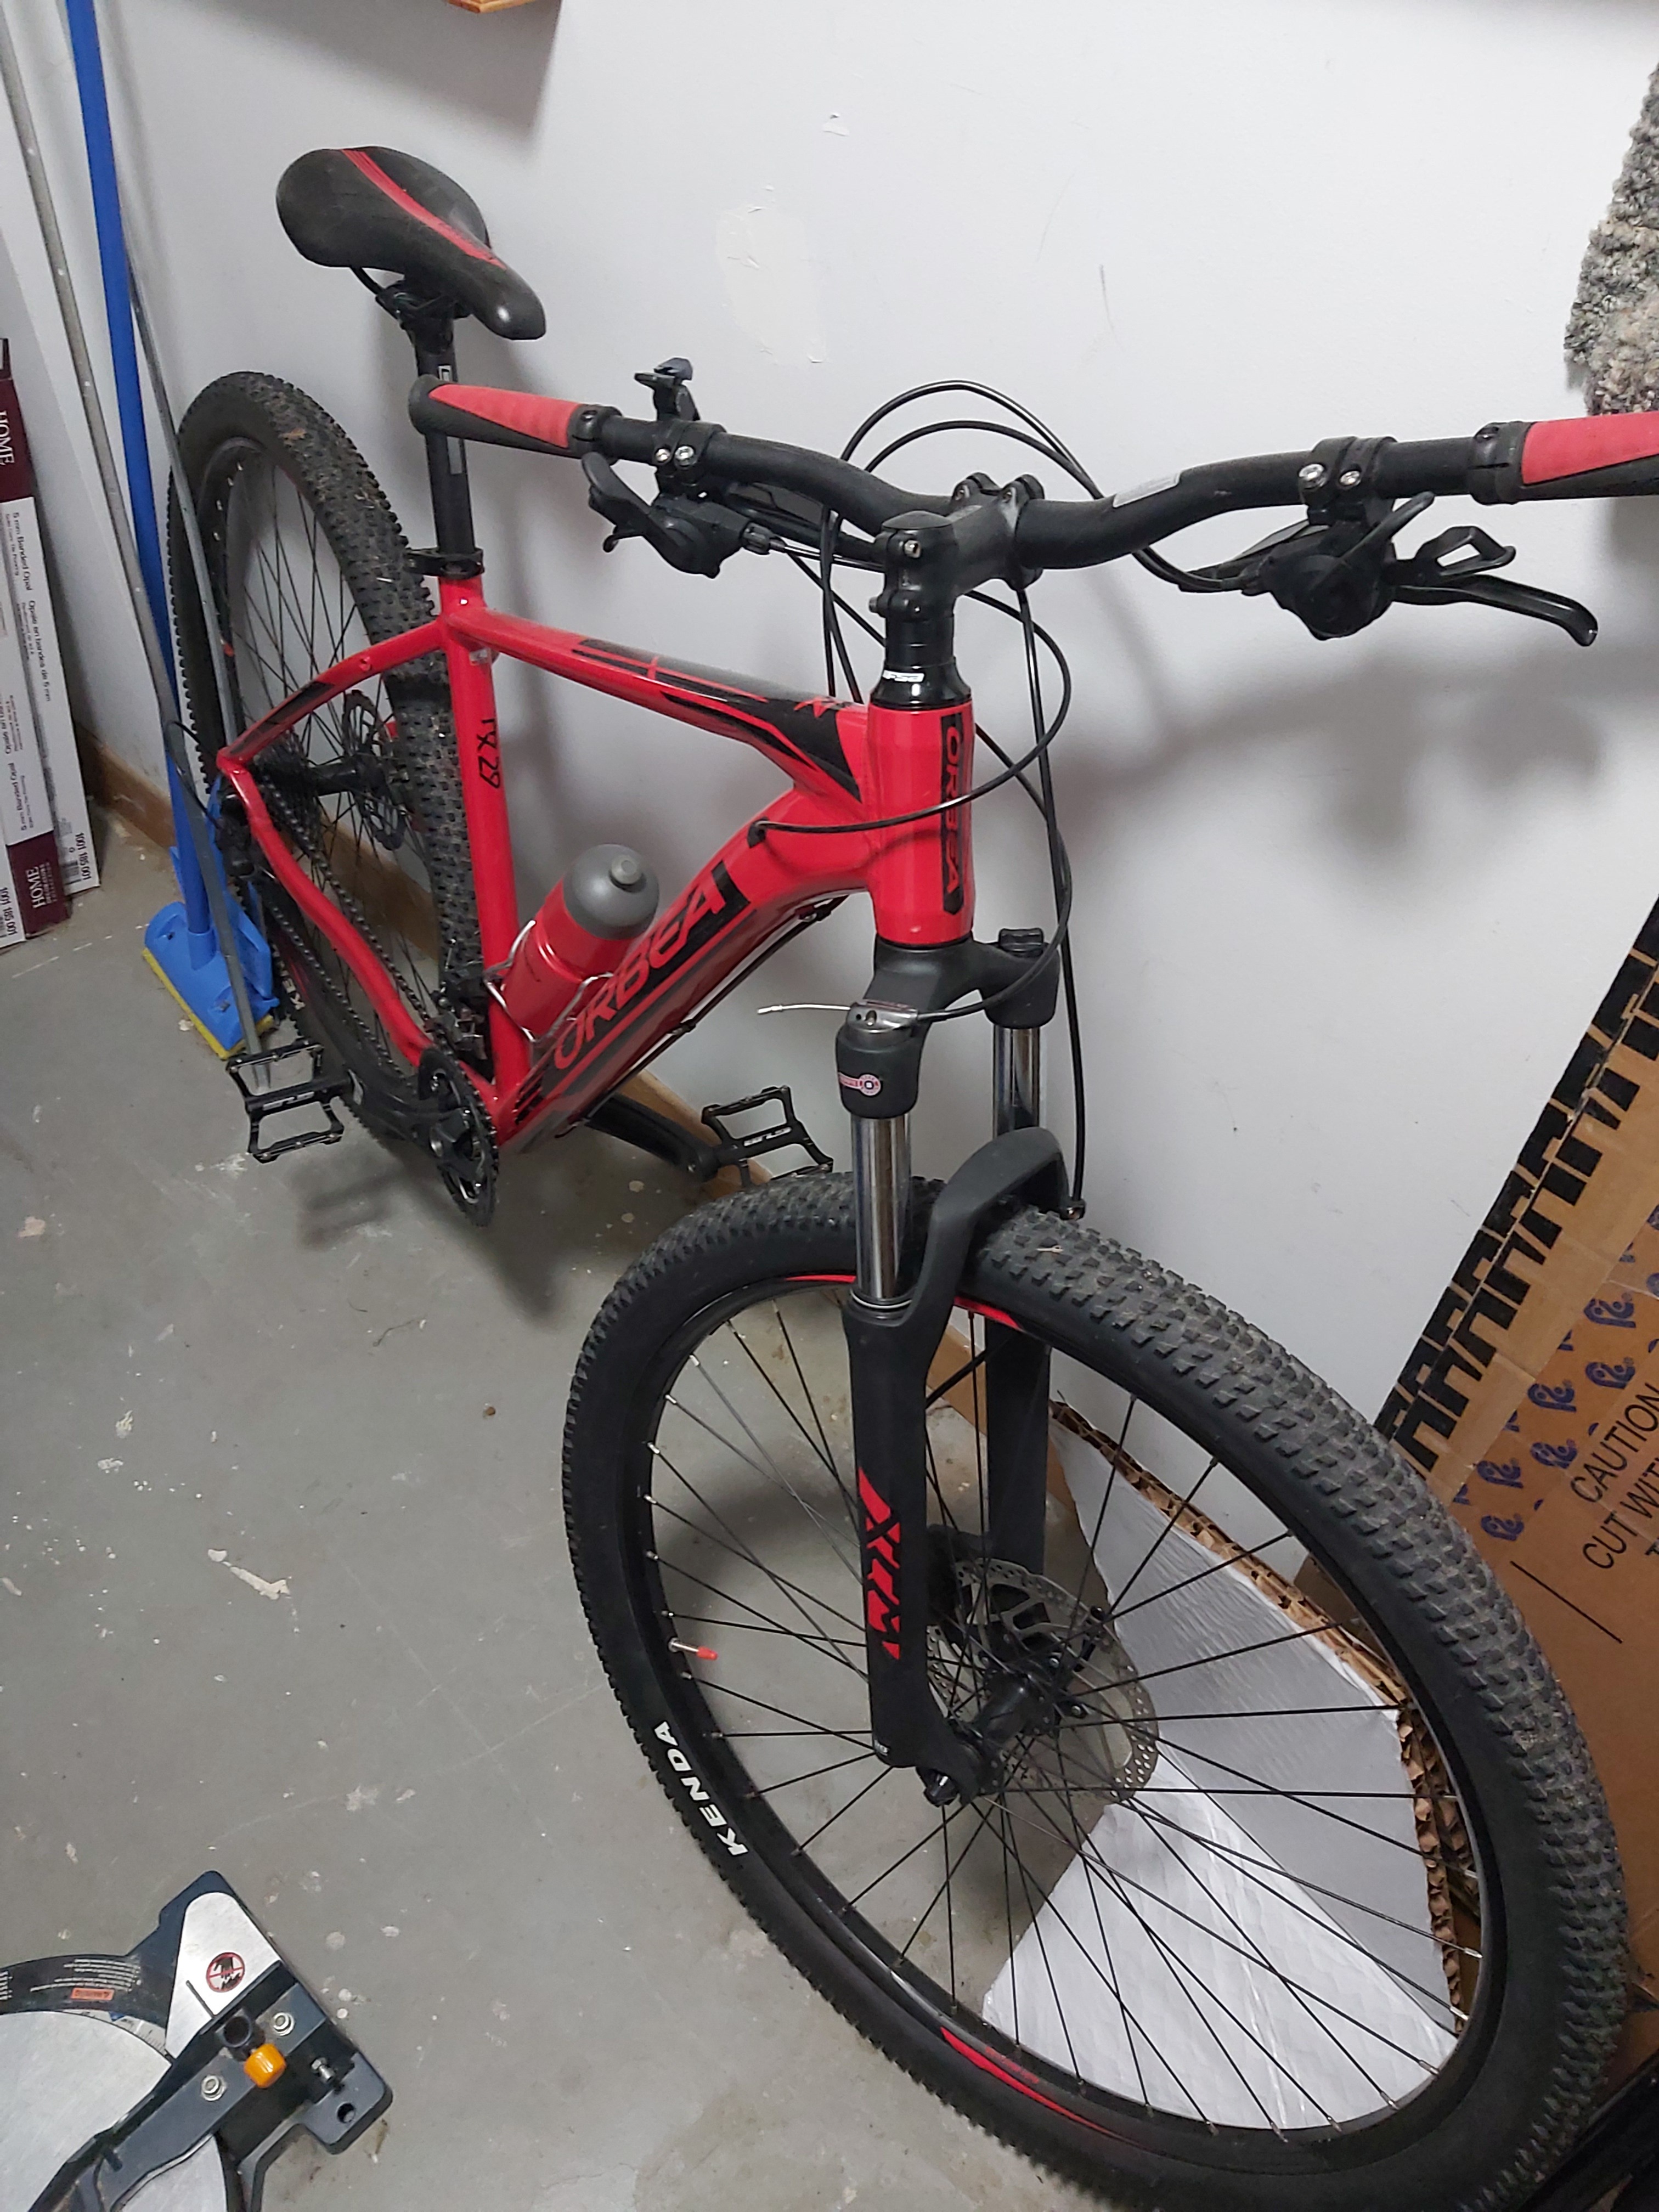 Orbea MX 30 size Large - $600 SOLD - Sell Trade ECMTB